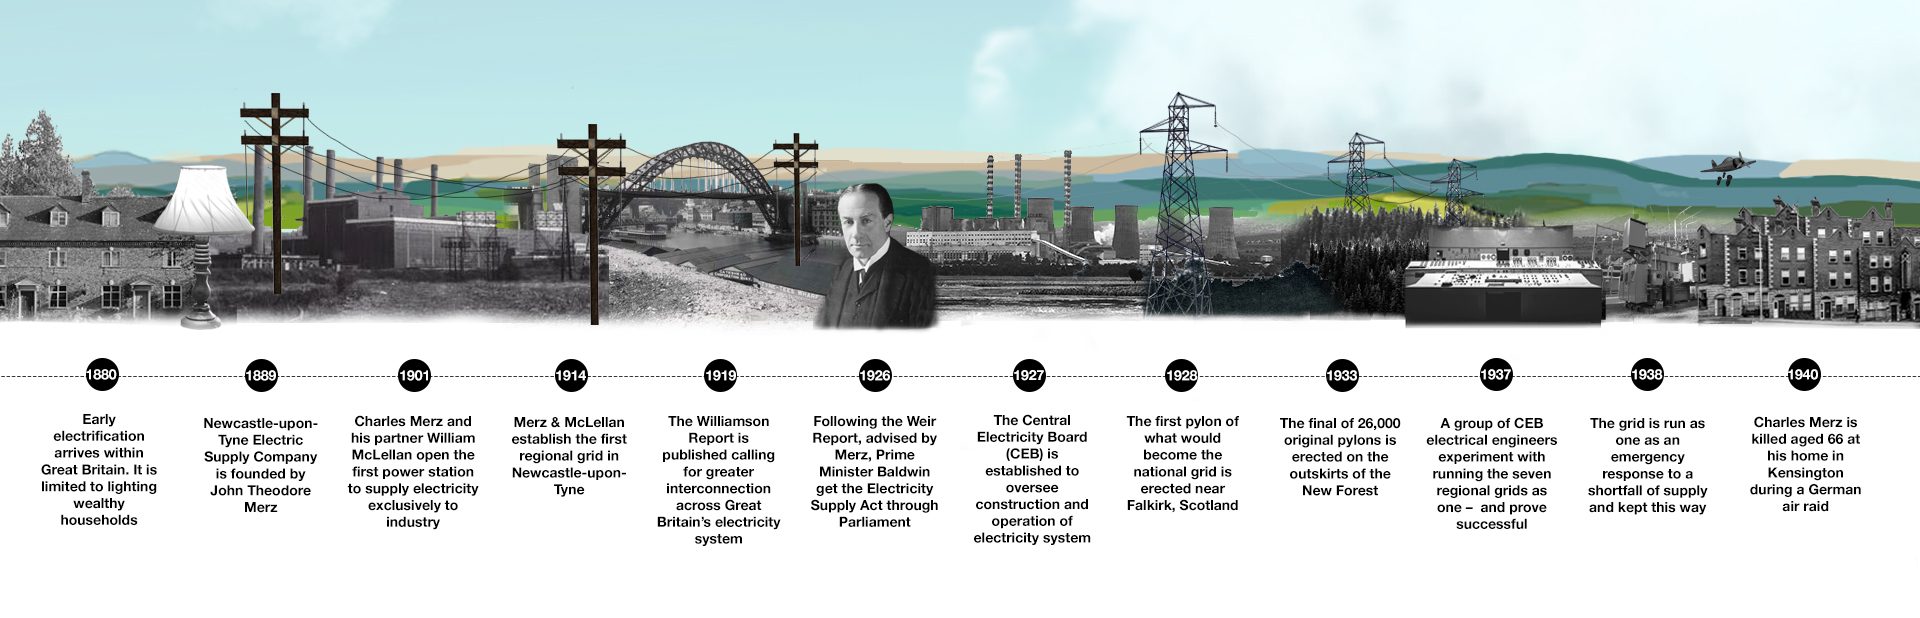 Great Britain's National Grid: A Timeline